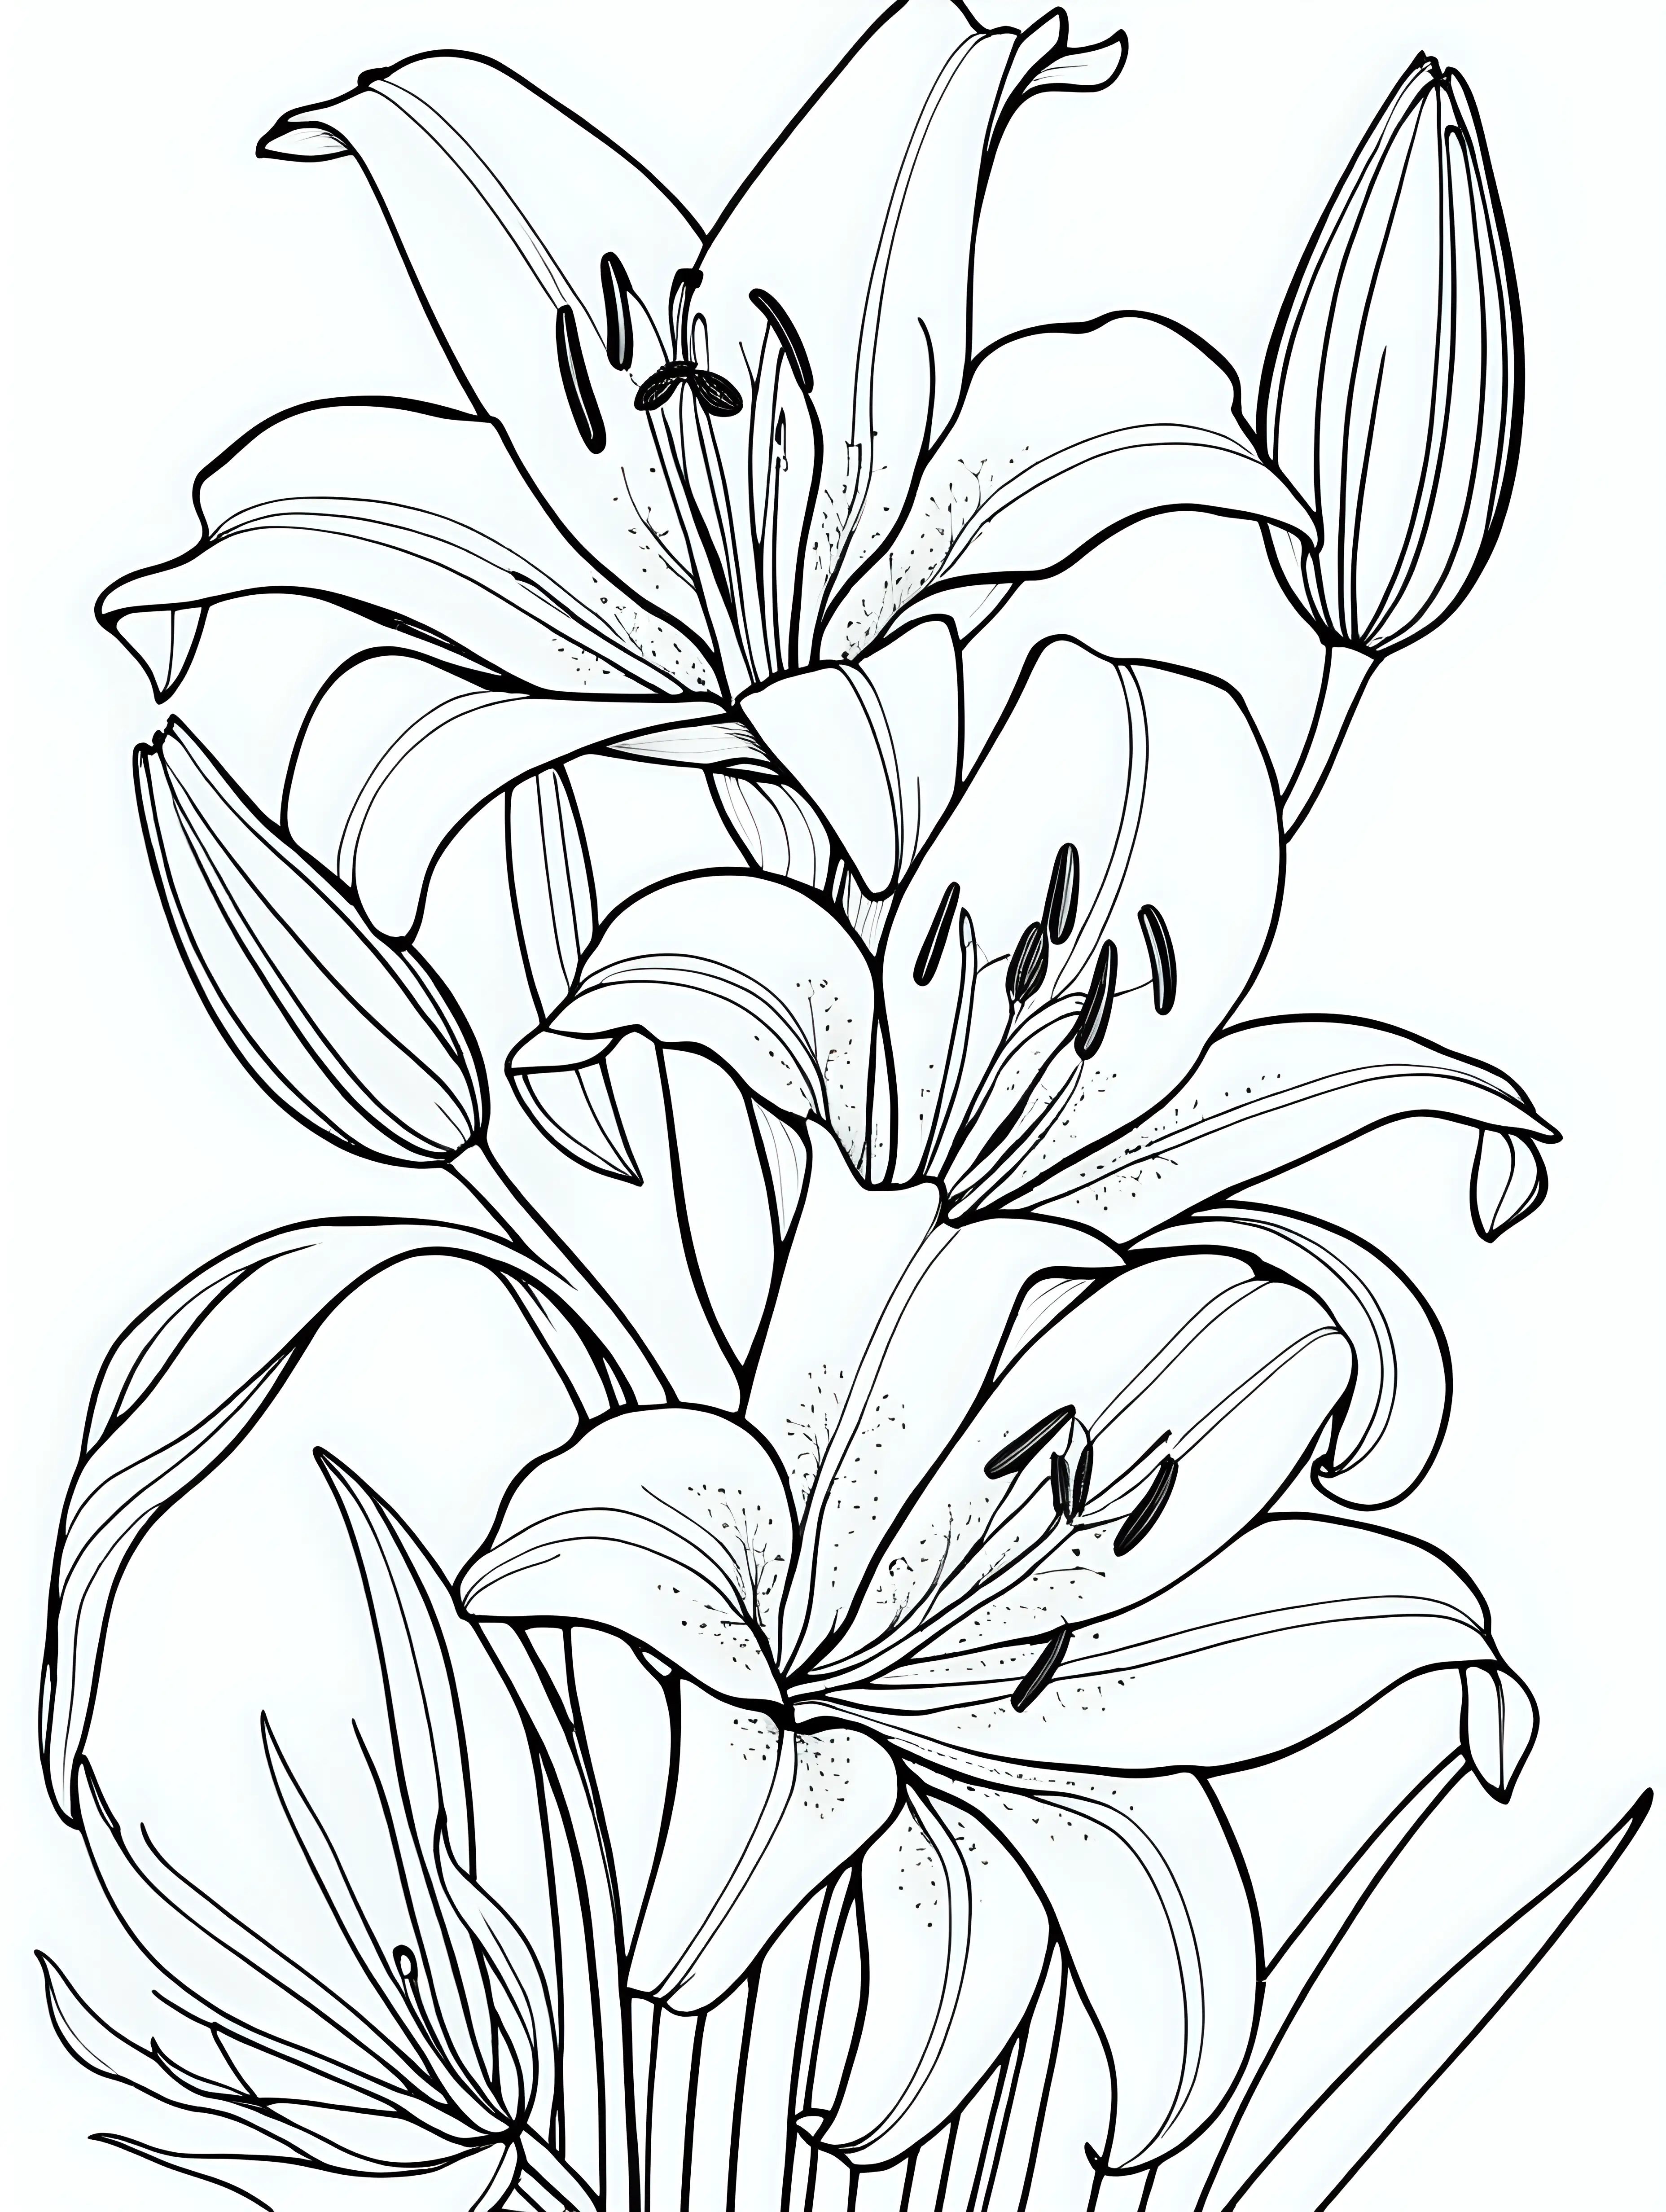 Elegant Lily Flowers Coloring Page Cartoon Style with Thin Lines